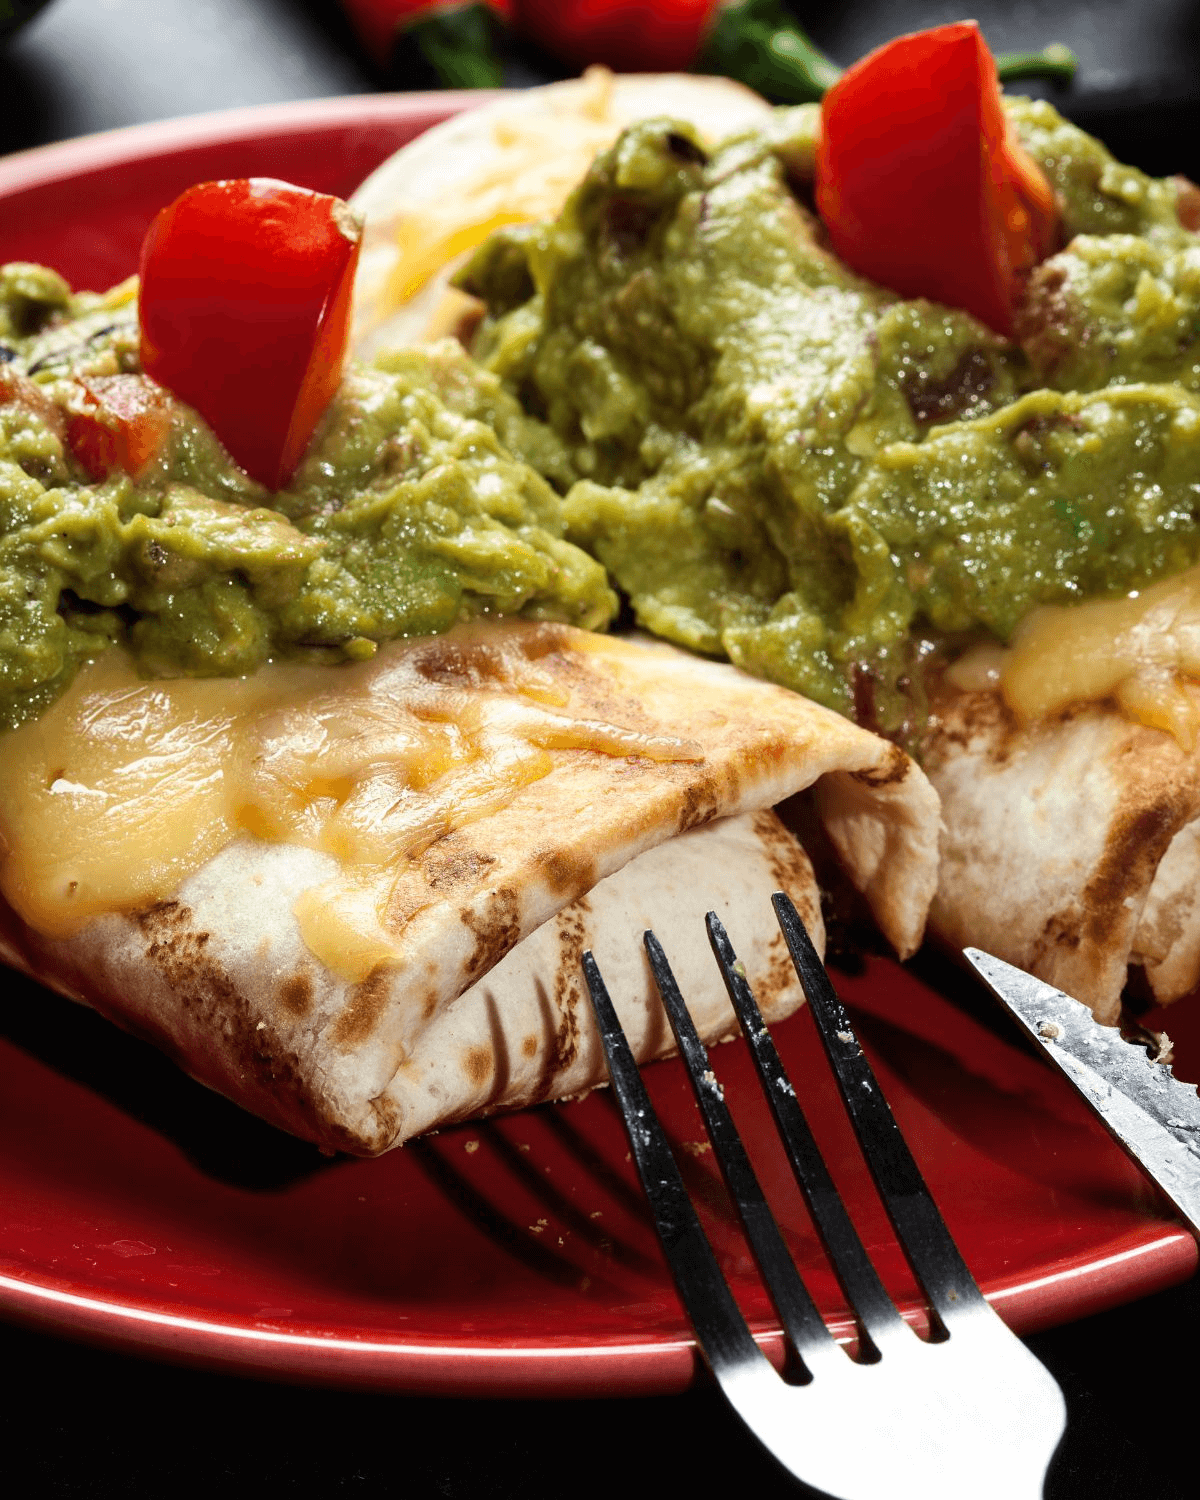 Two beef chimichangas with guacamole and tomatoes on a plate.